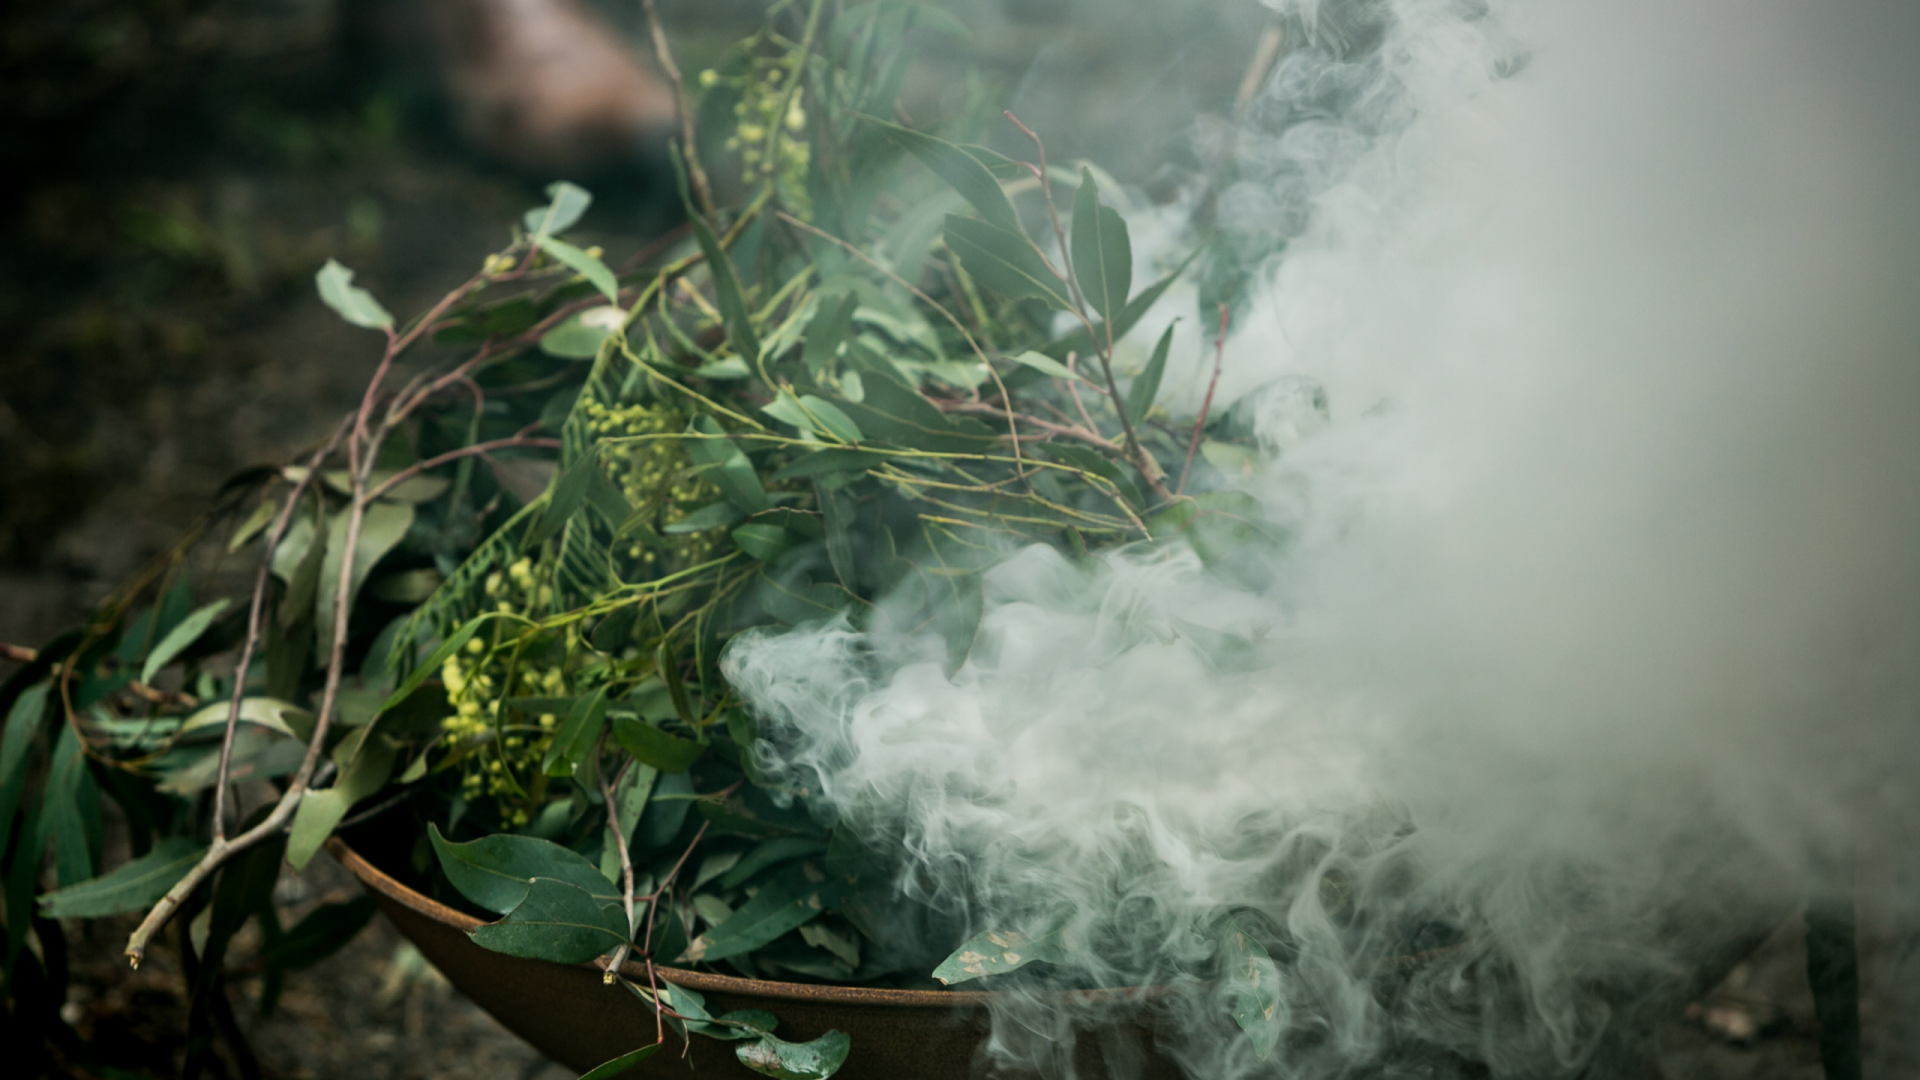 Close up photo of a bunch of gum leaves being used in a smoking ceremony. The leaves are clear on the right hand side and move to be completely obscured by smoke on the left.